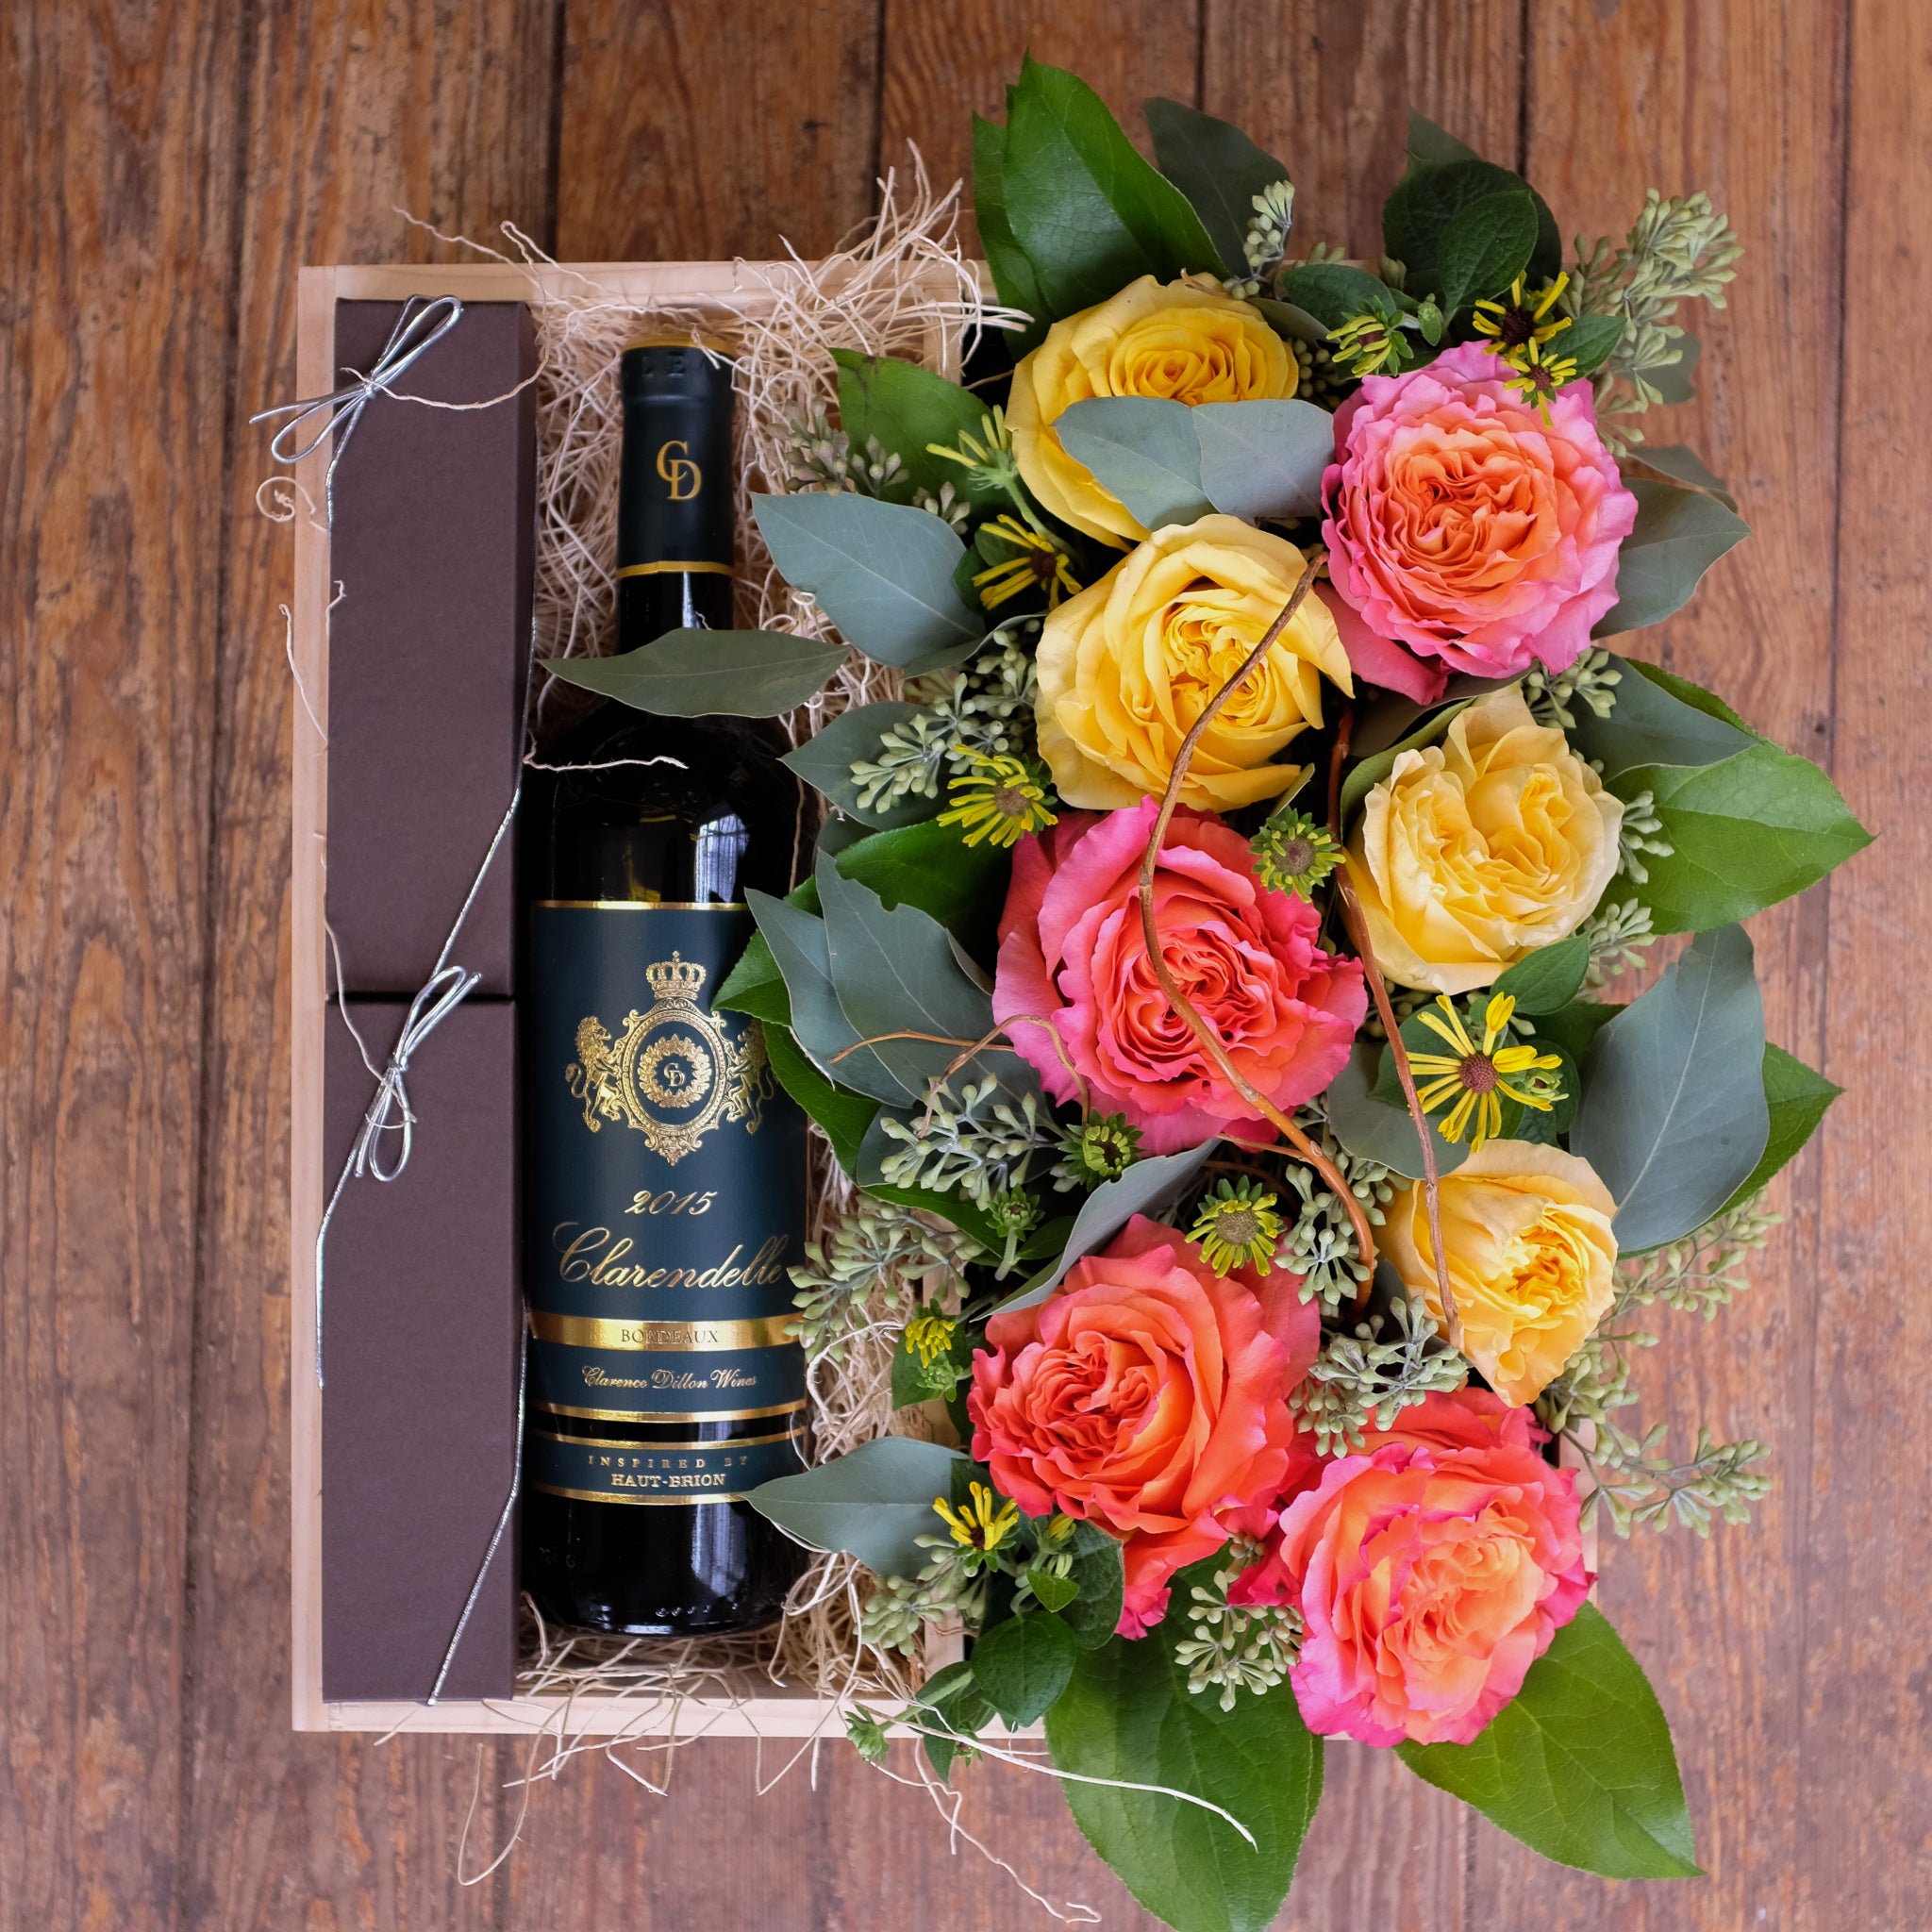 Wine, flowers and chocolates gift crate by Michler Florist, Lexington, KY.